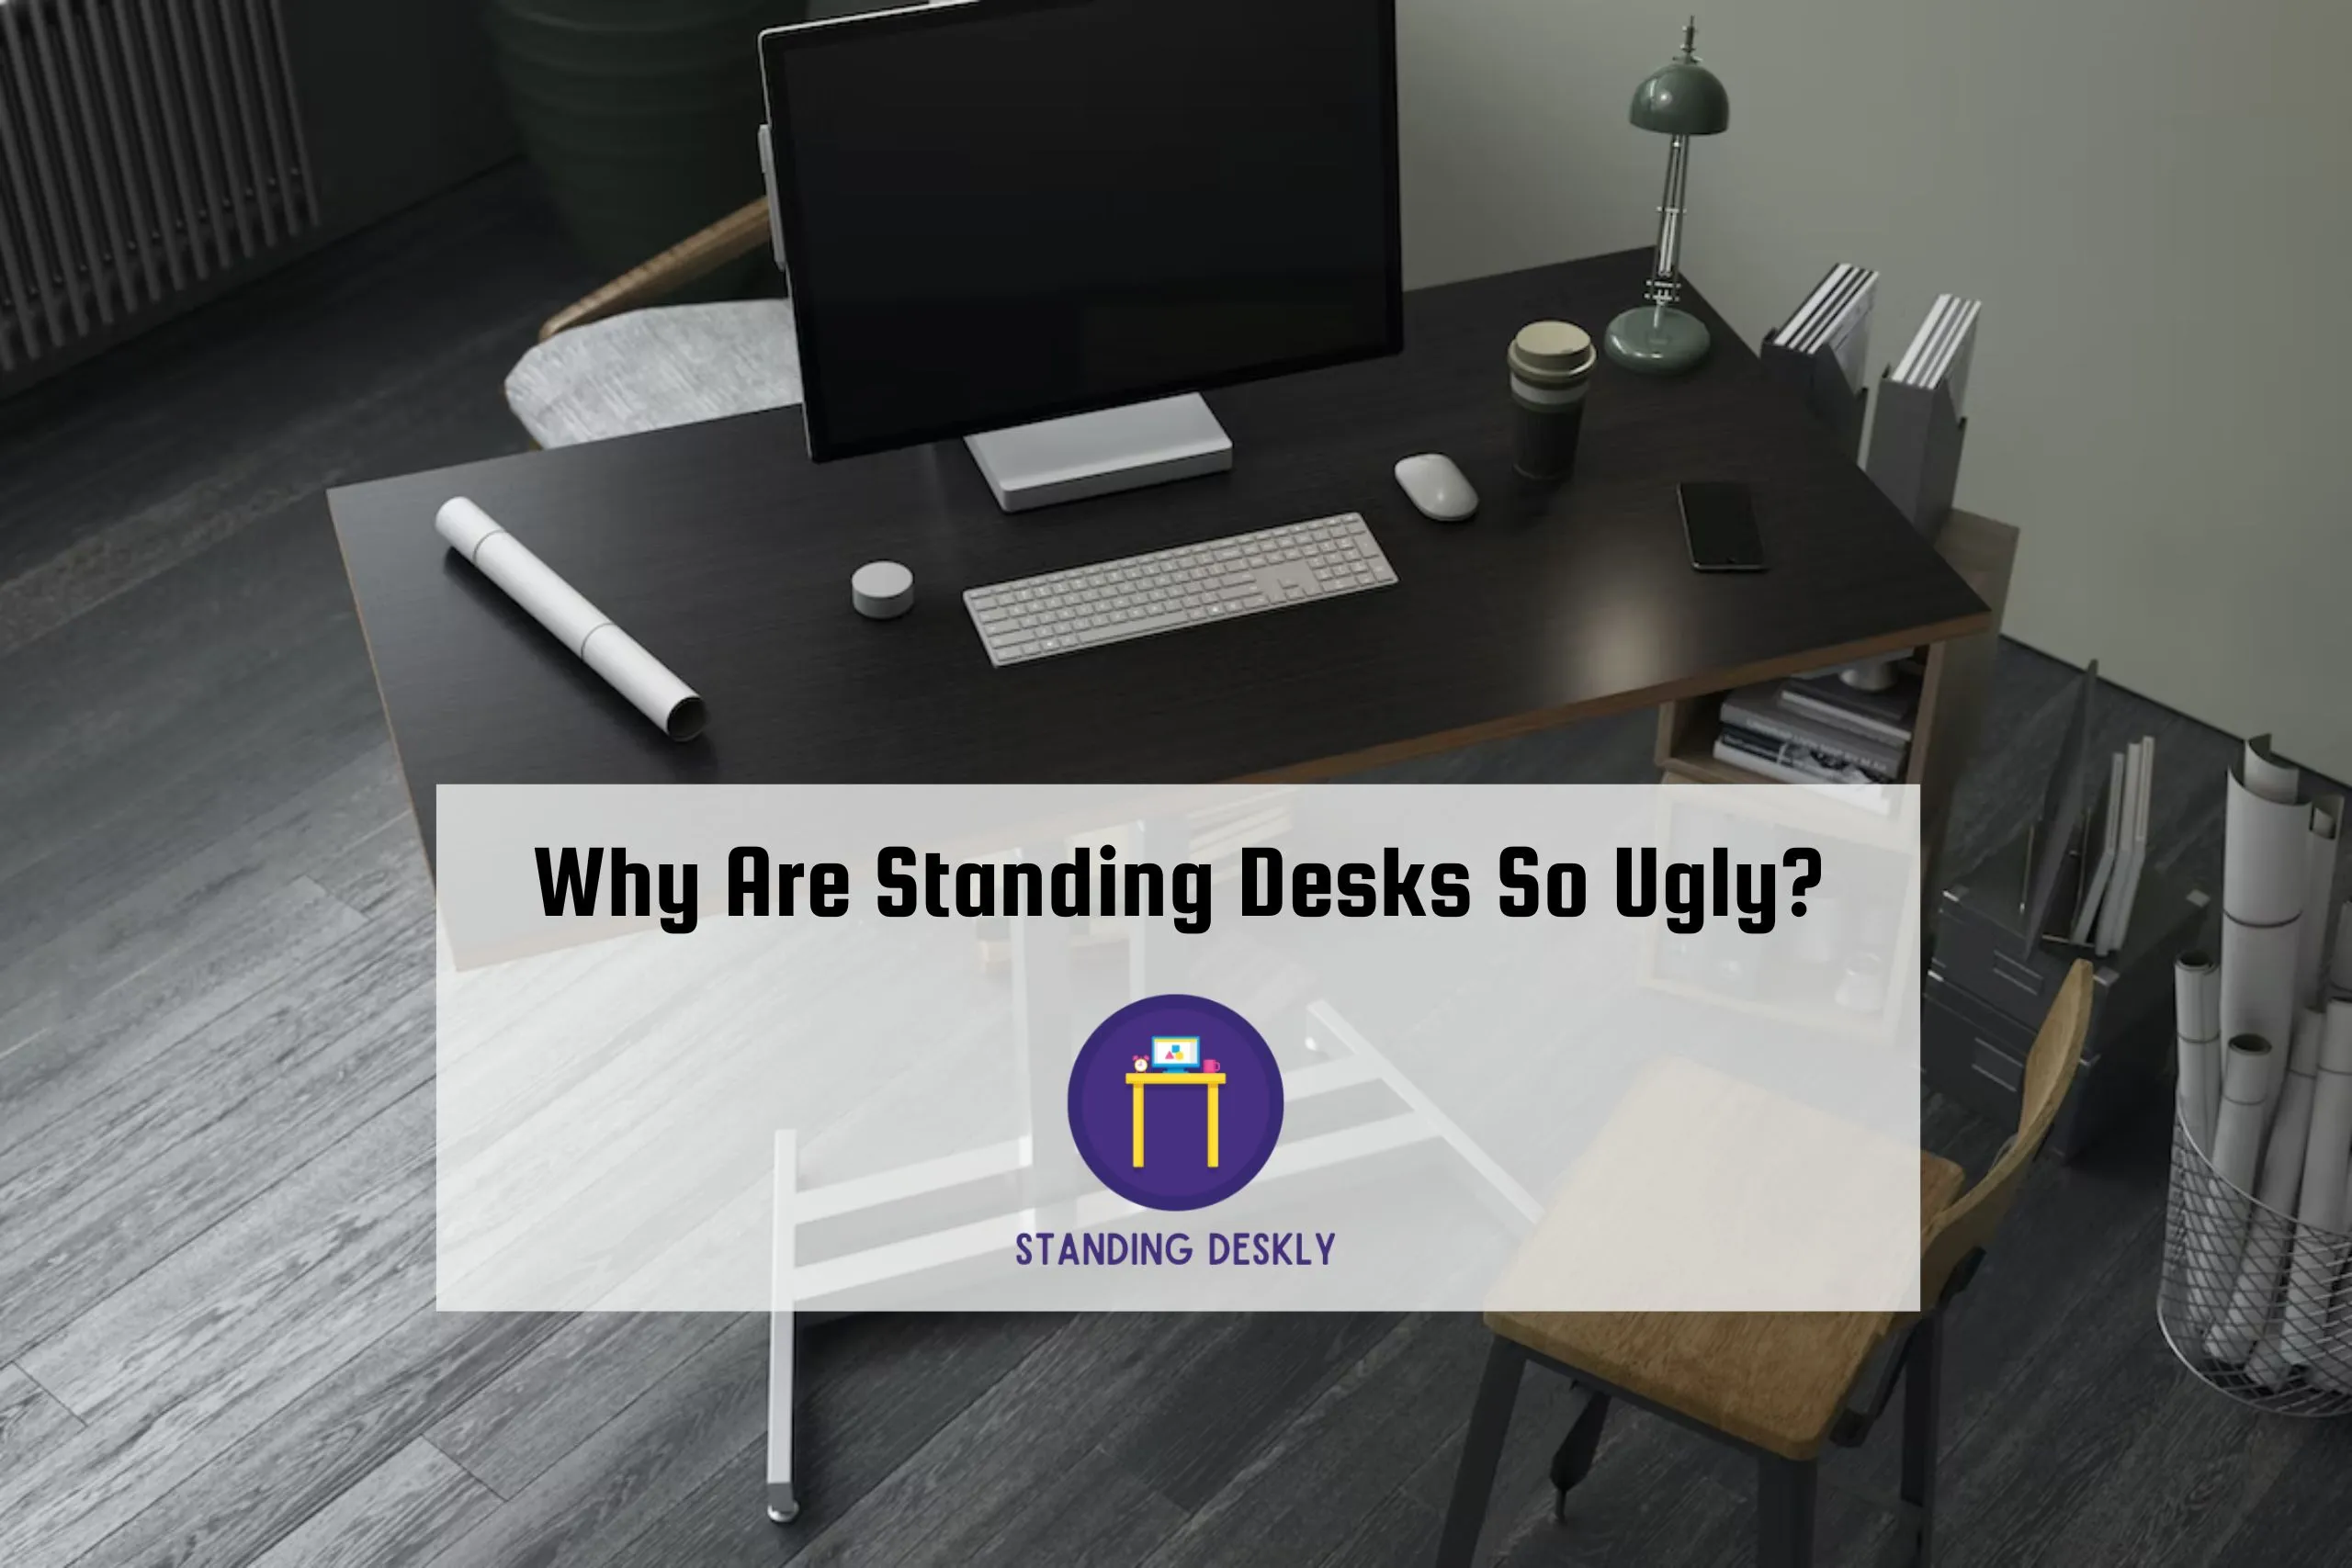 Why Are Standing Desks So Ugly